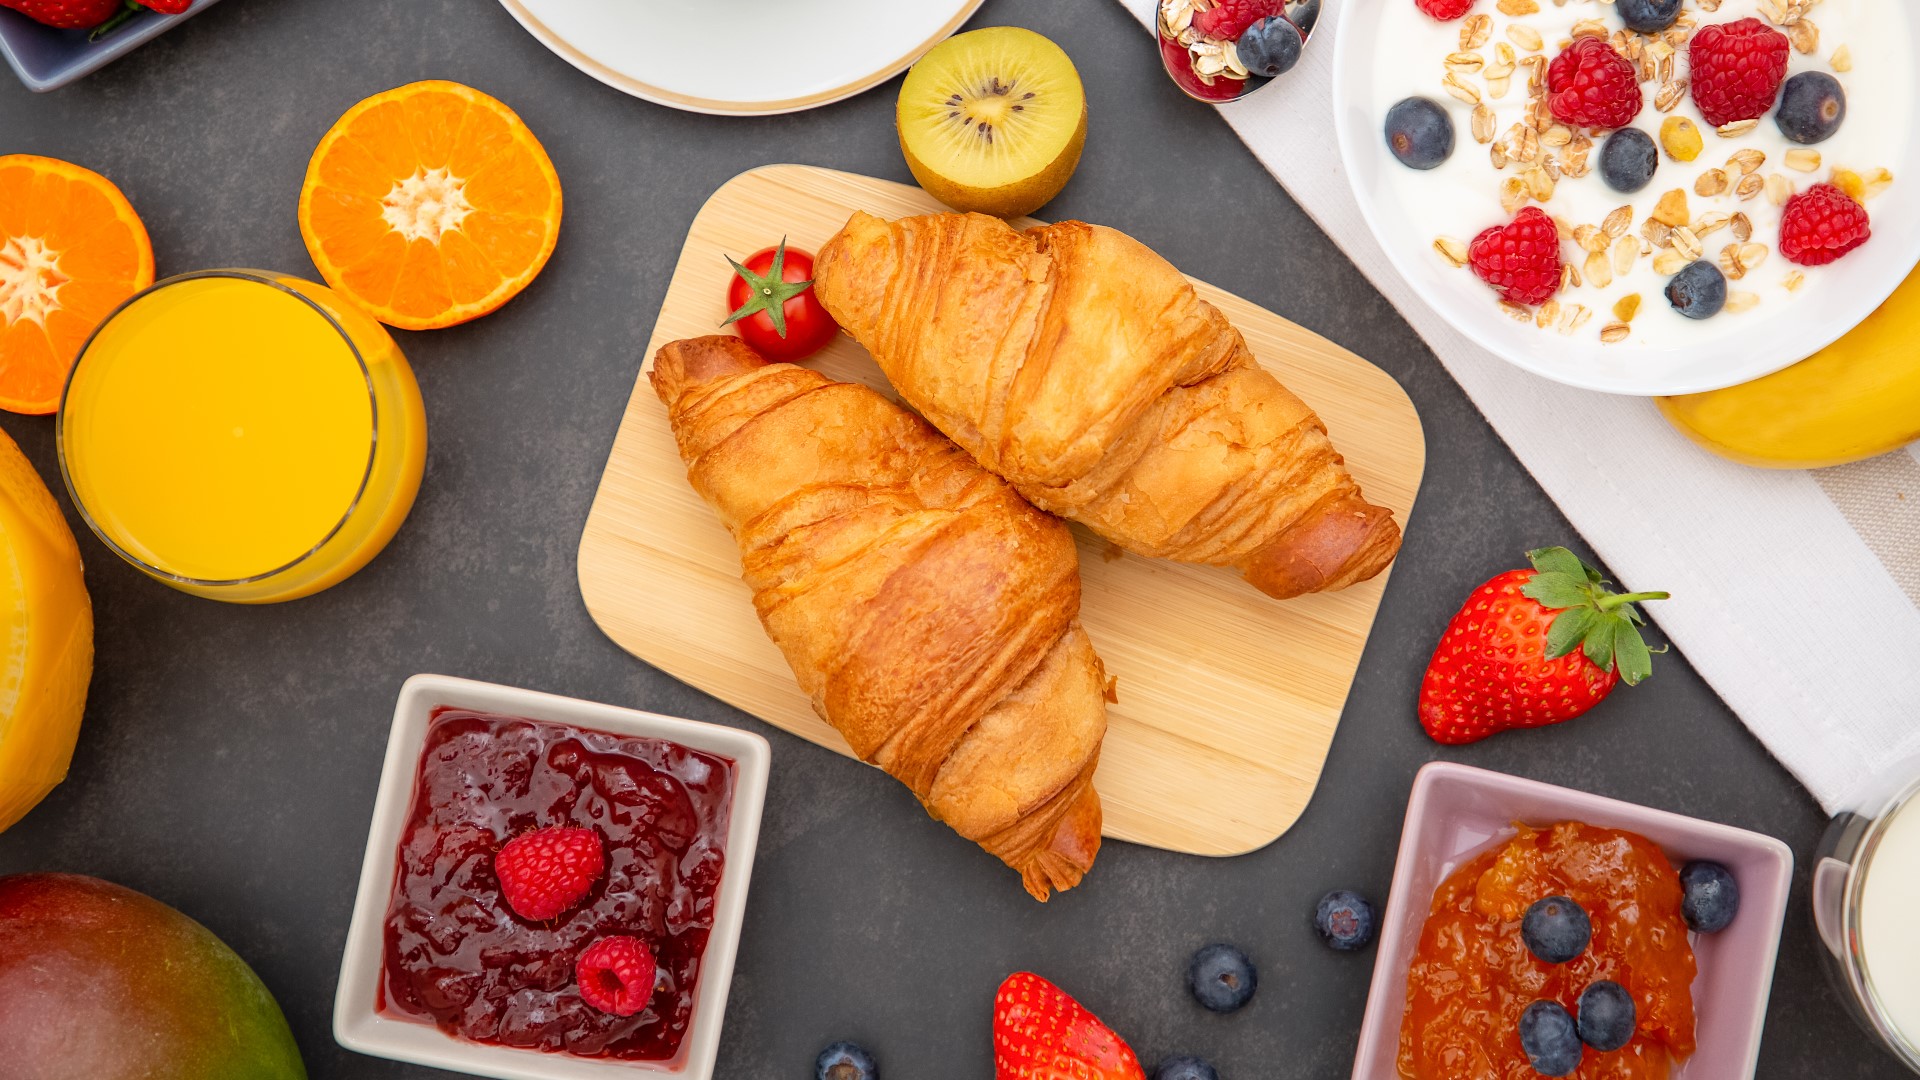 Robin and Rennee Catering launches a new brunch menu. The sister duo demonstrates how to make French toast croissants at home!